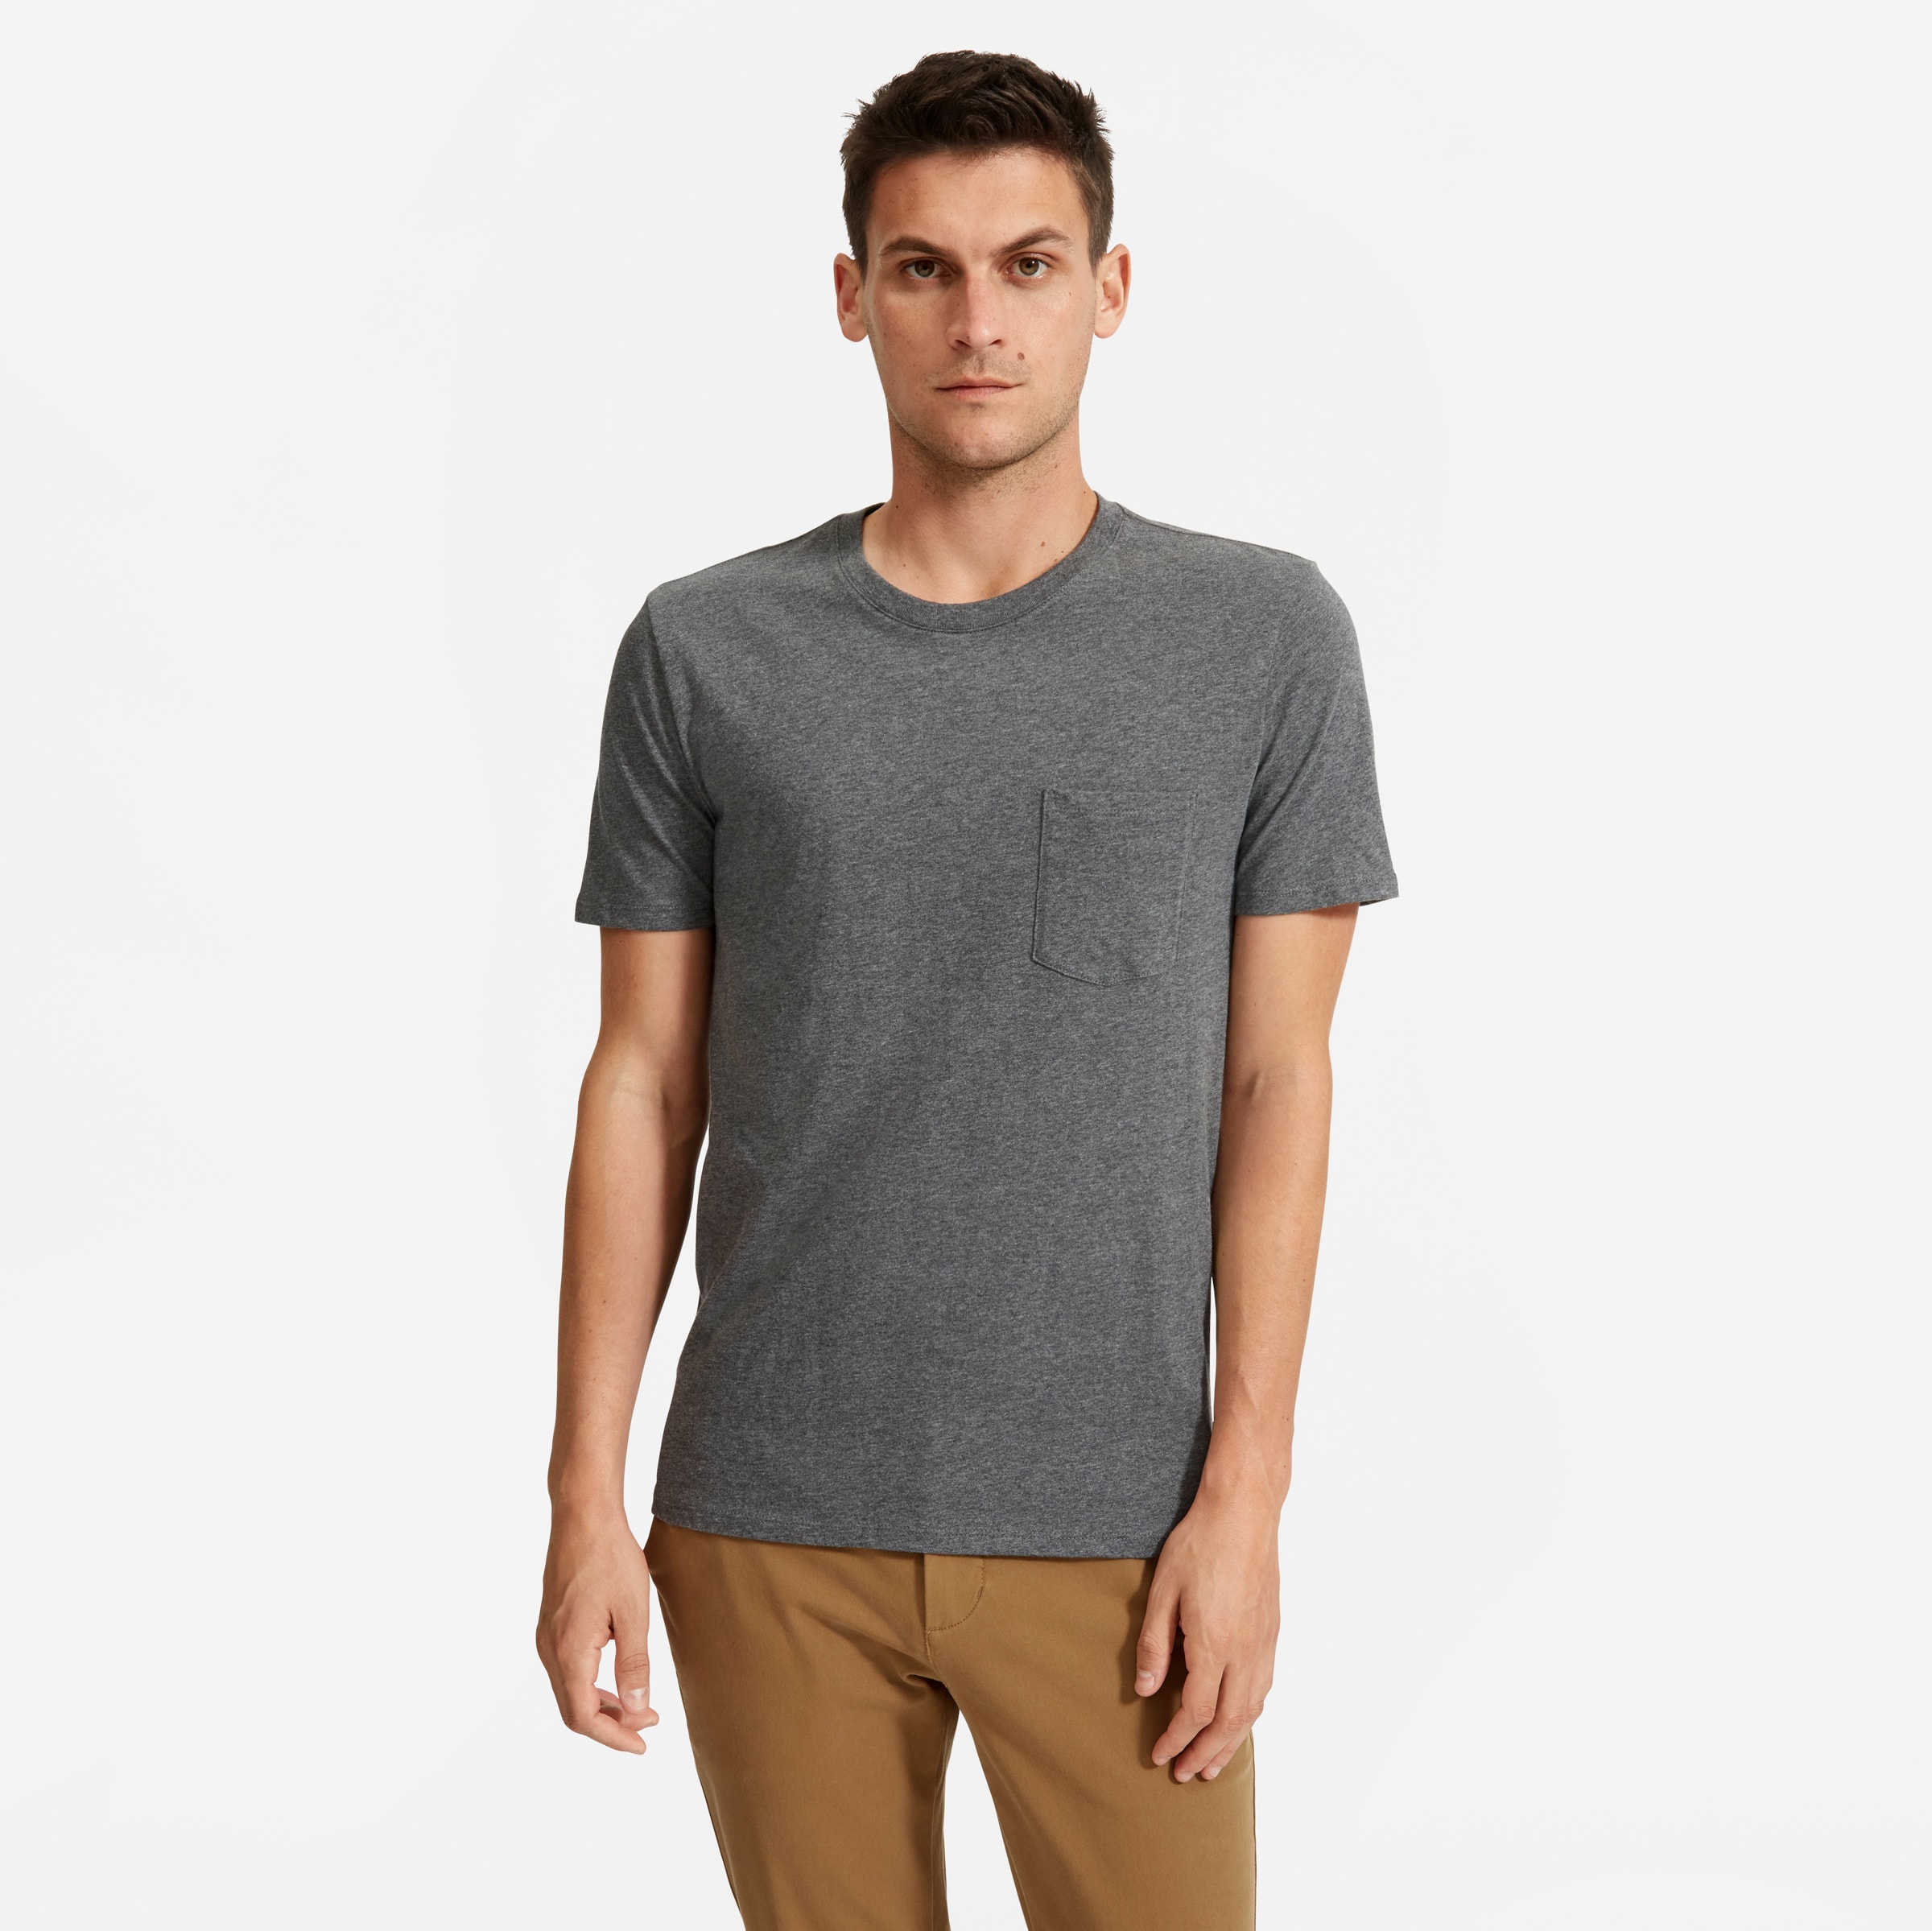 The Cotton Pocket Heather Charcoal – Everlane